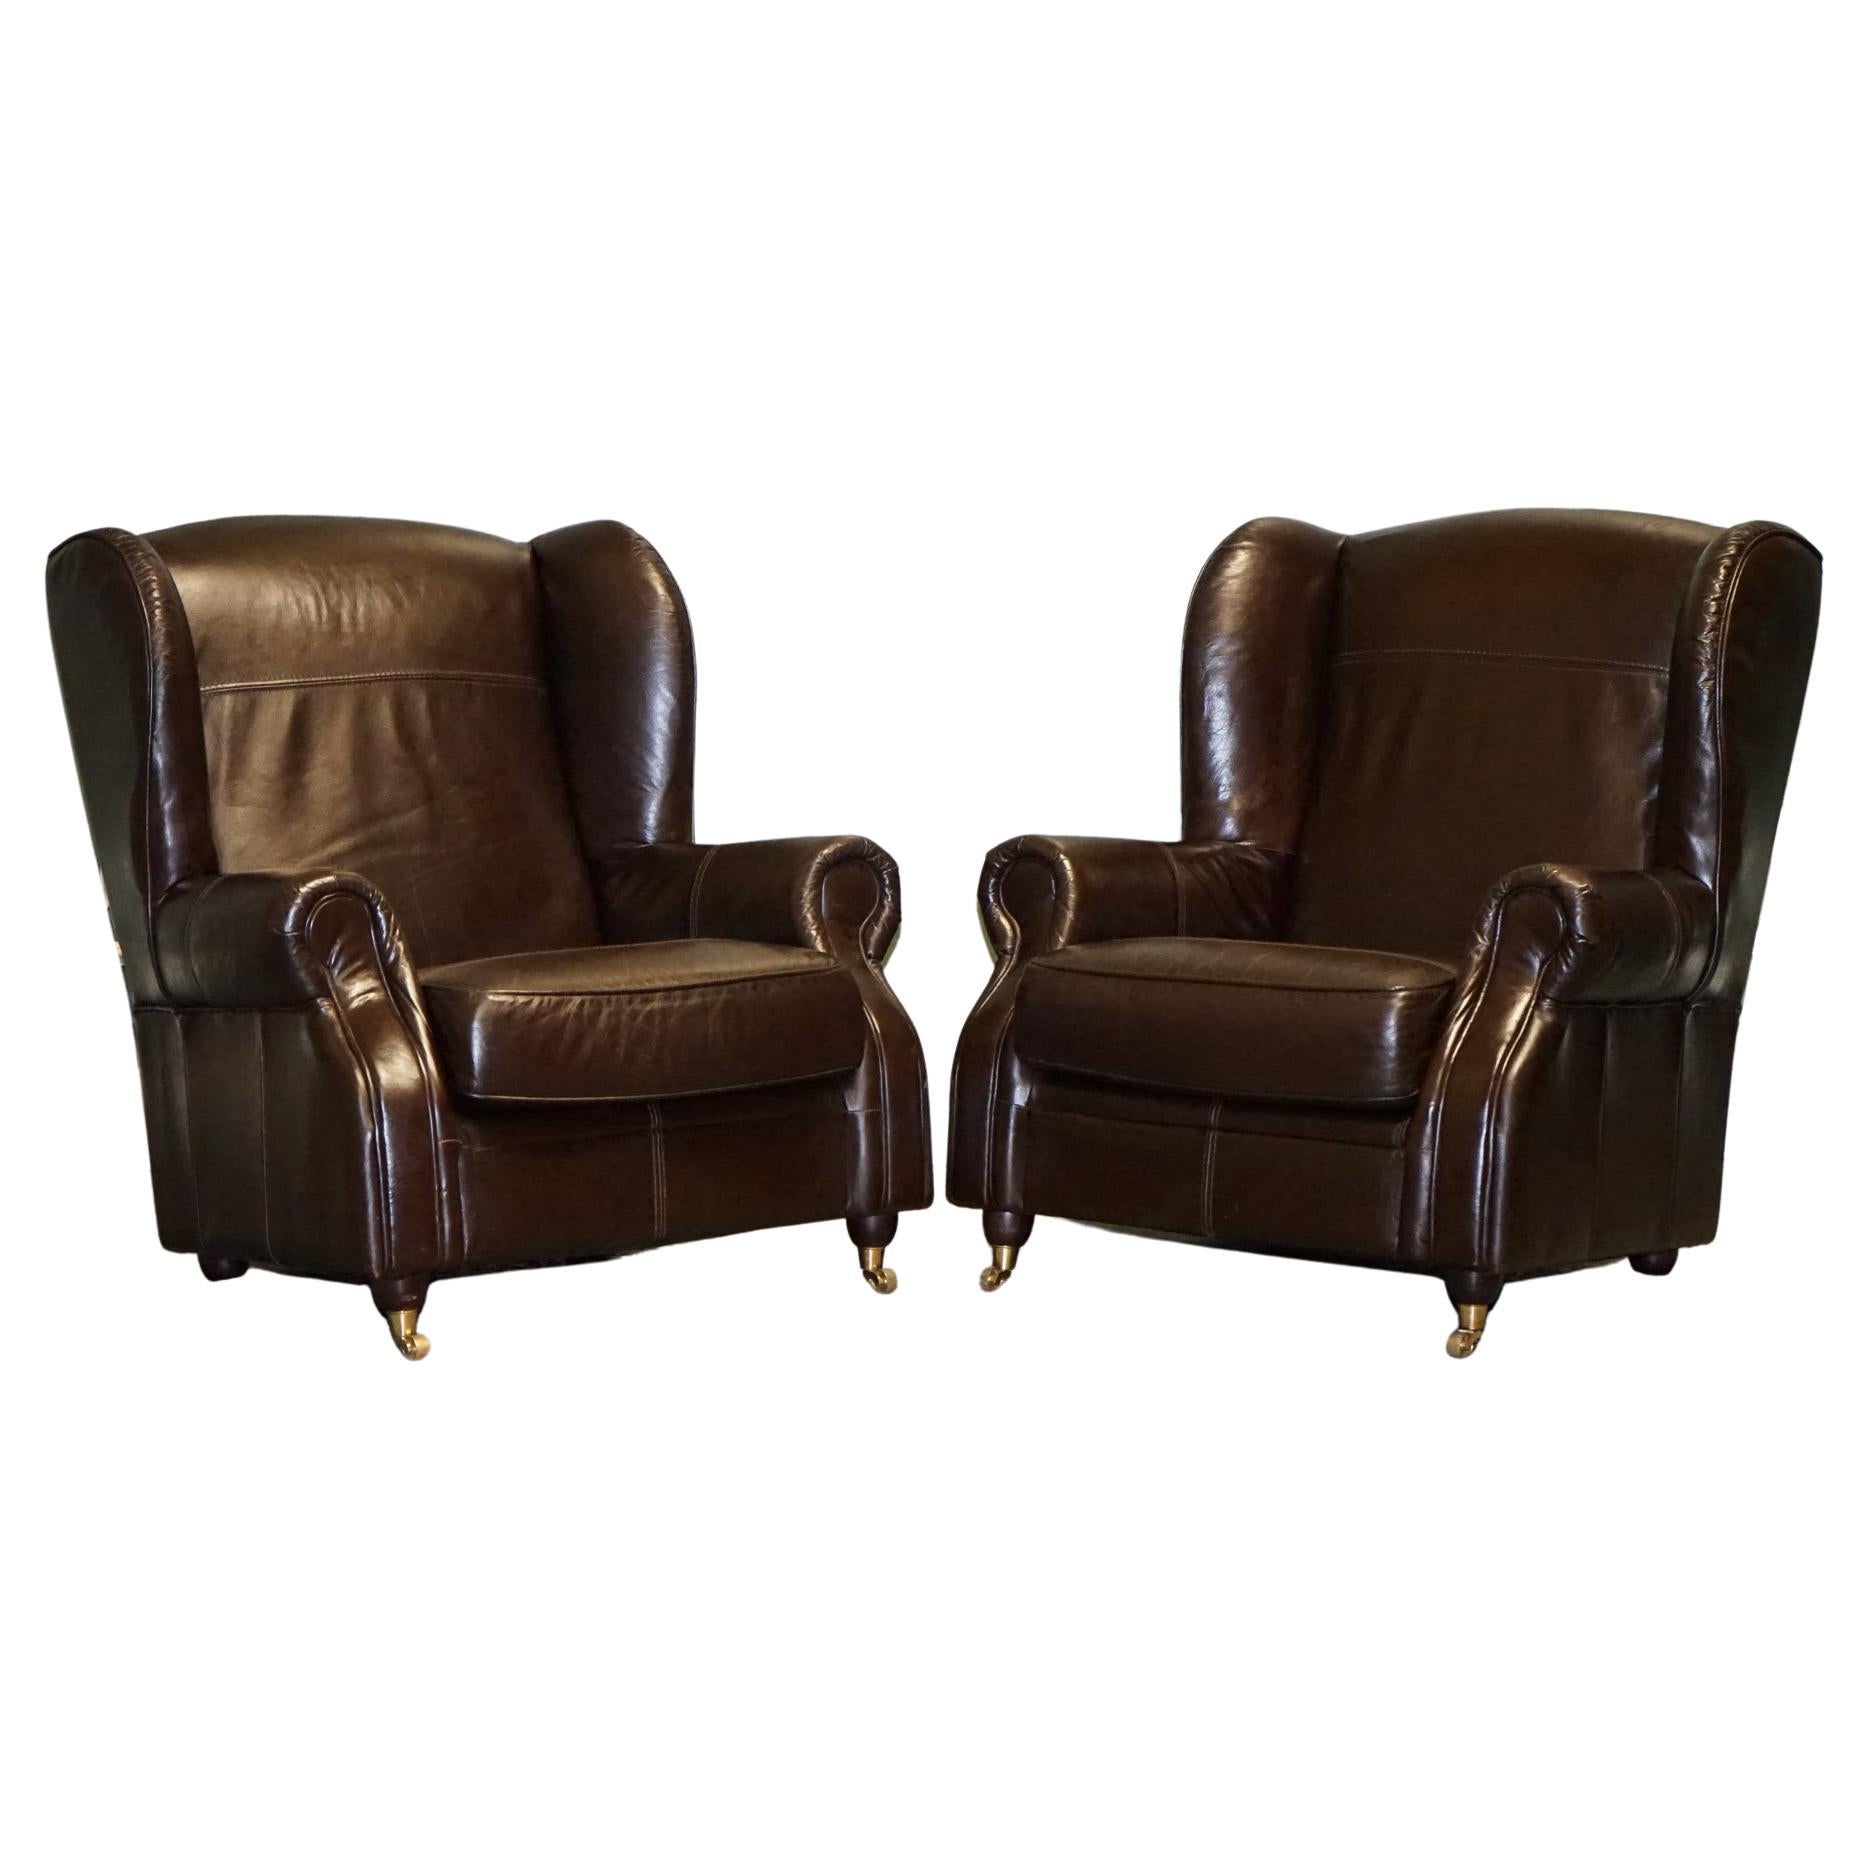 ViNTAGE PAIR OF CHOCOLATE BROWN LEATHER WINGBACK CHAIRS